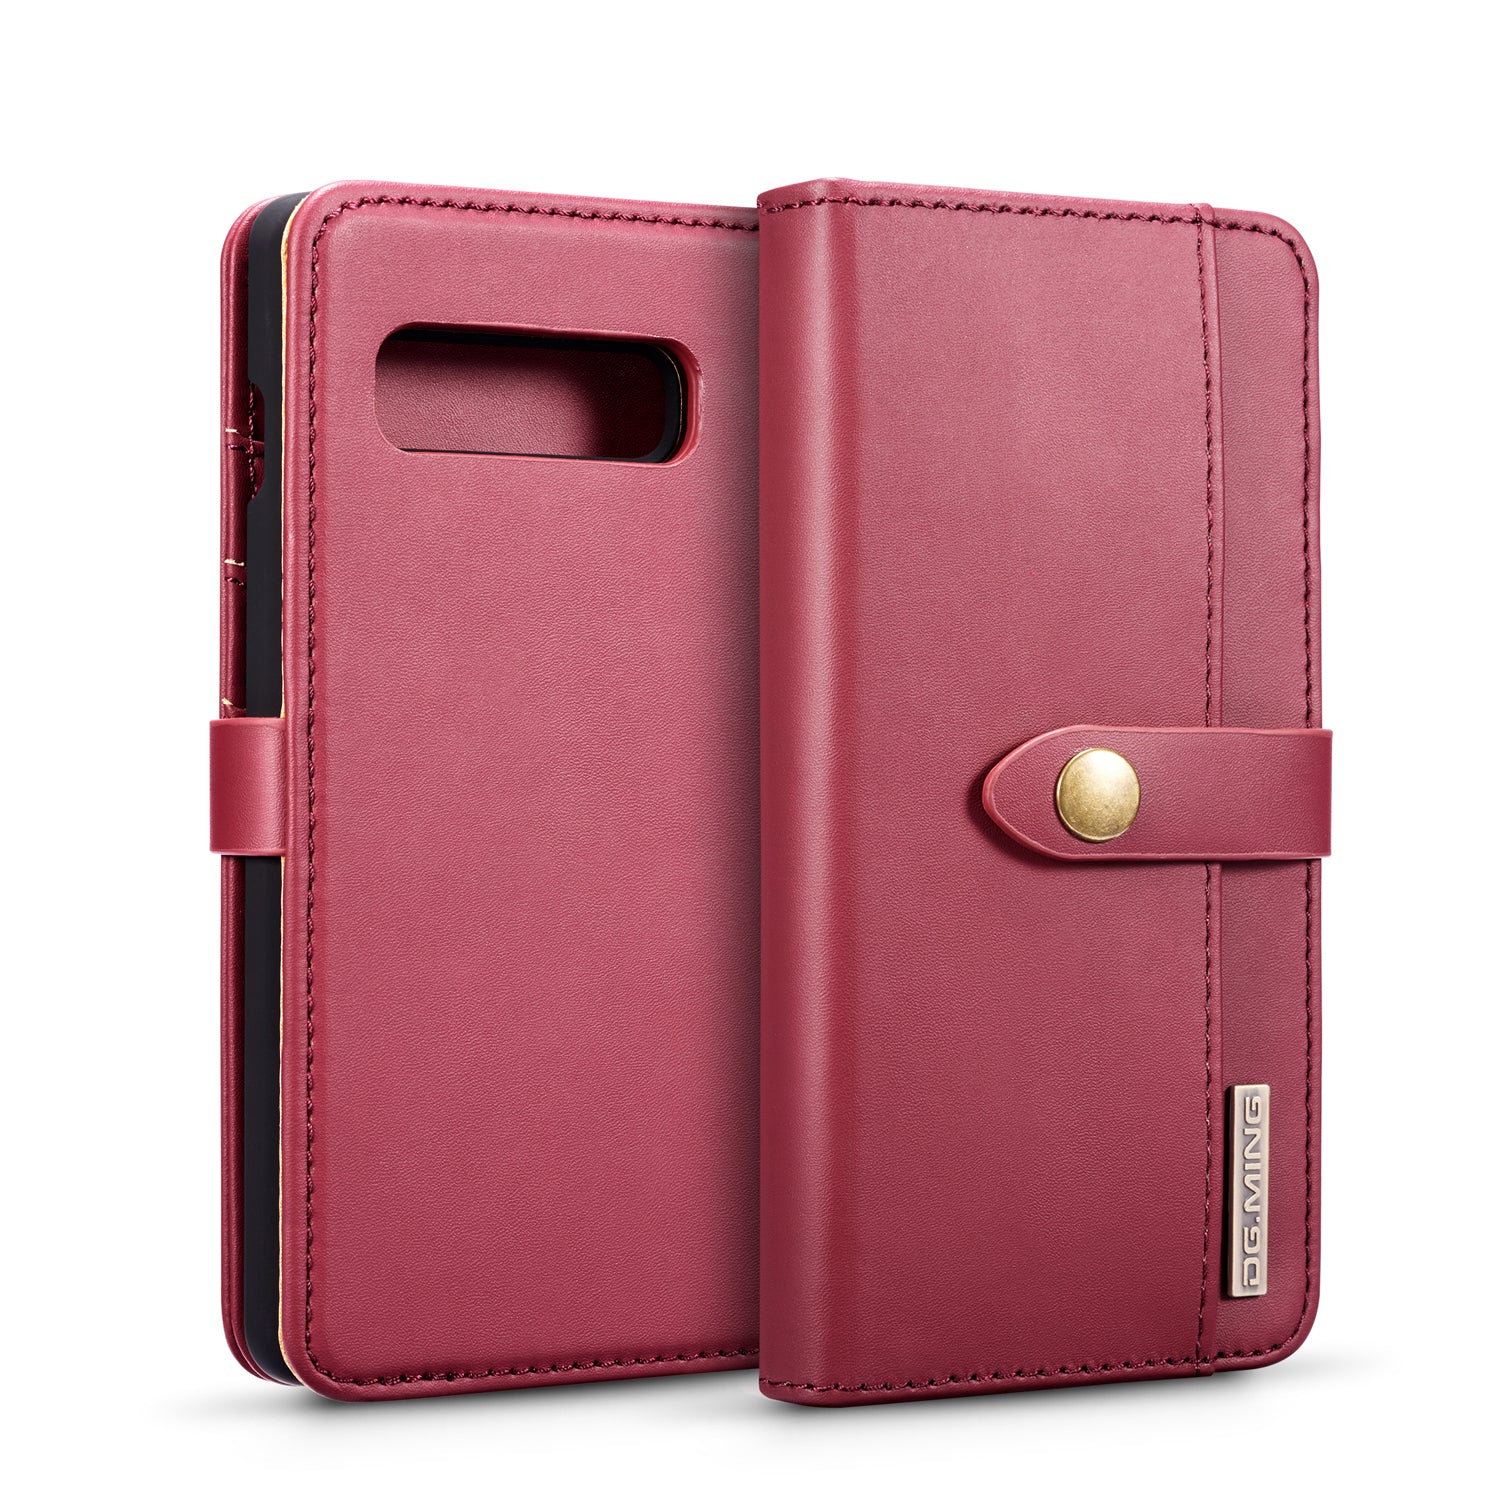 Flip Leather Card Holder Case for Samsung Galaxy S10/S10 Plus - imhave